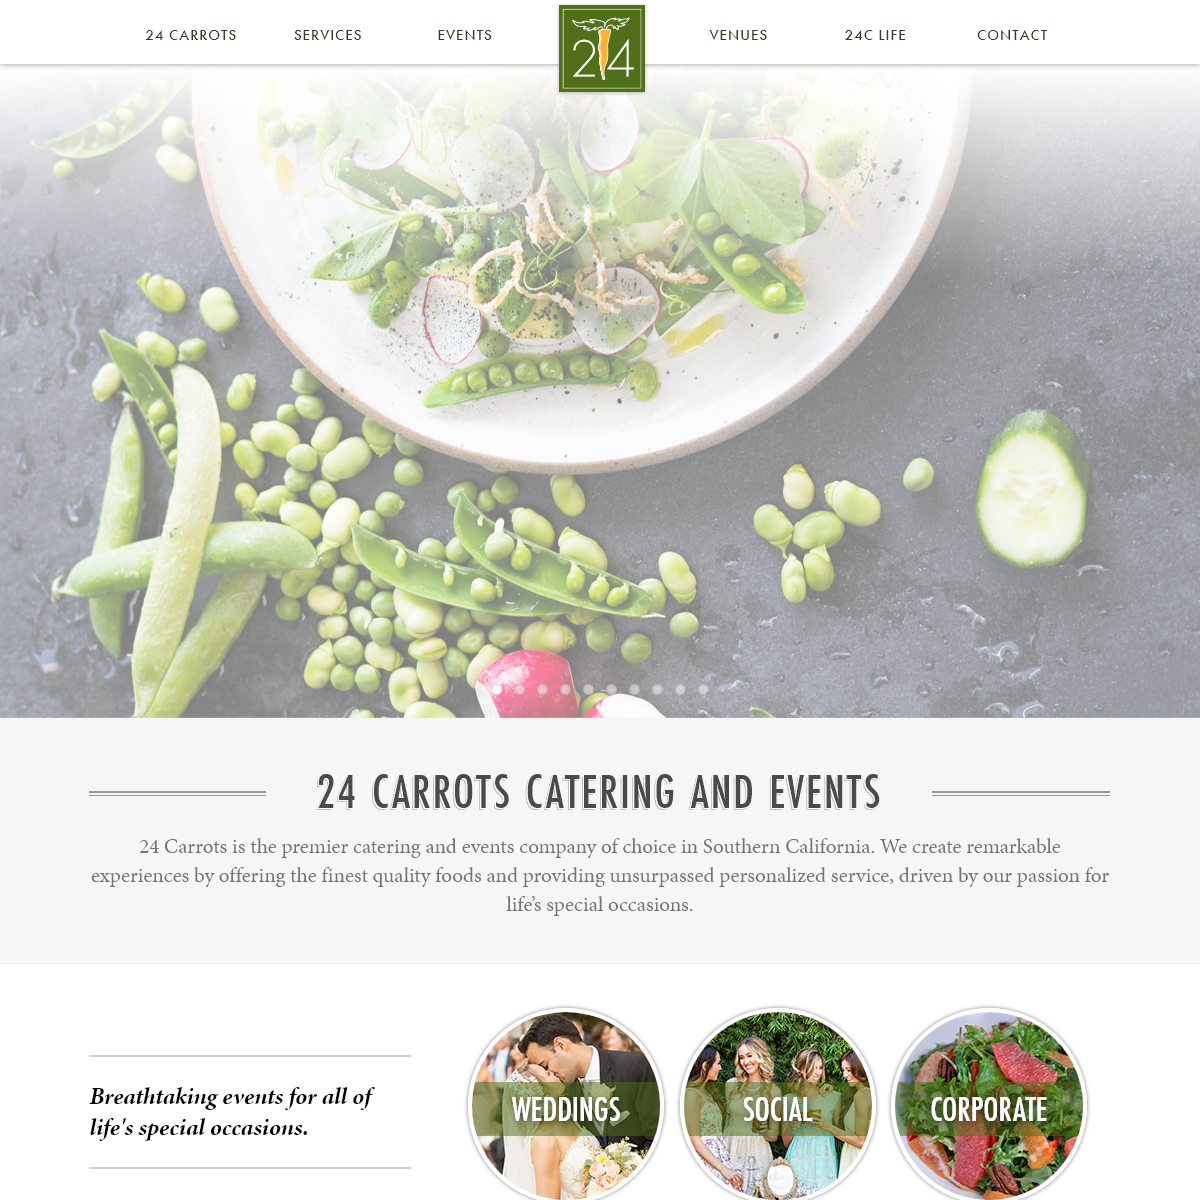 24 Carrots Catering and Events - Delicious food, personalized service, unforgettable memories